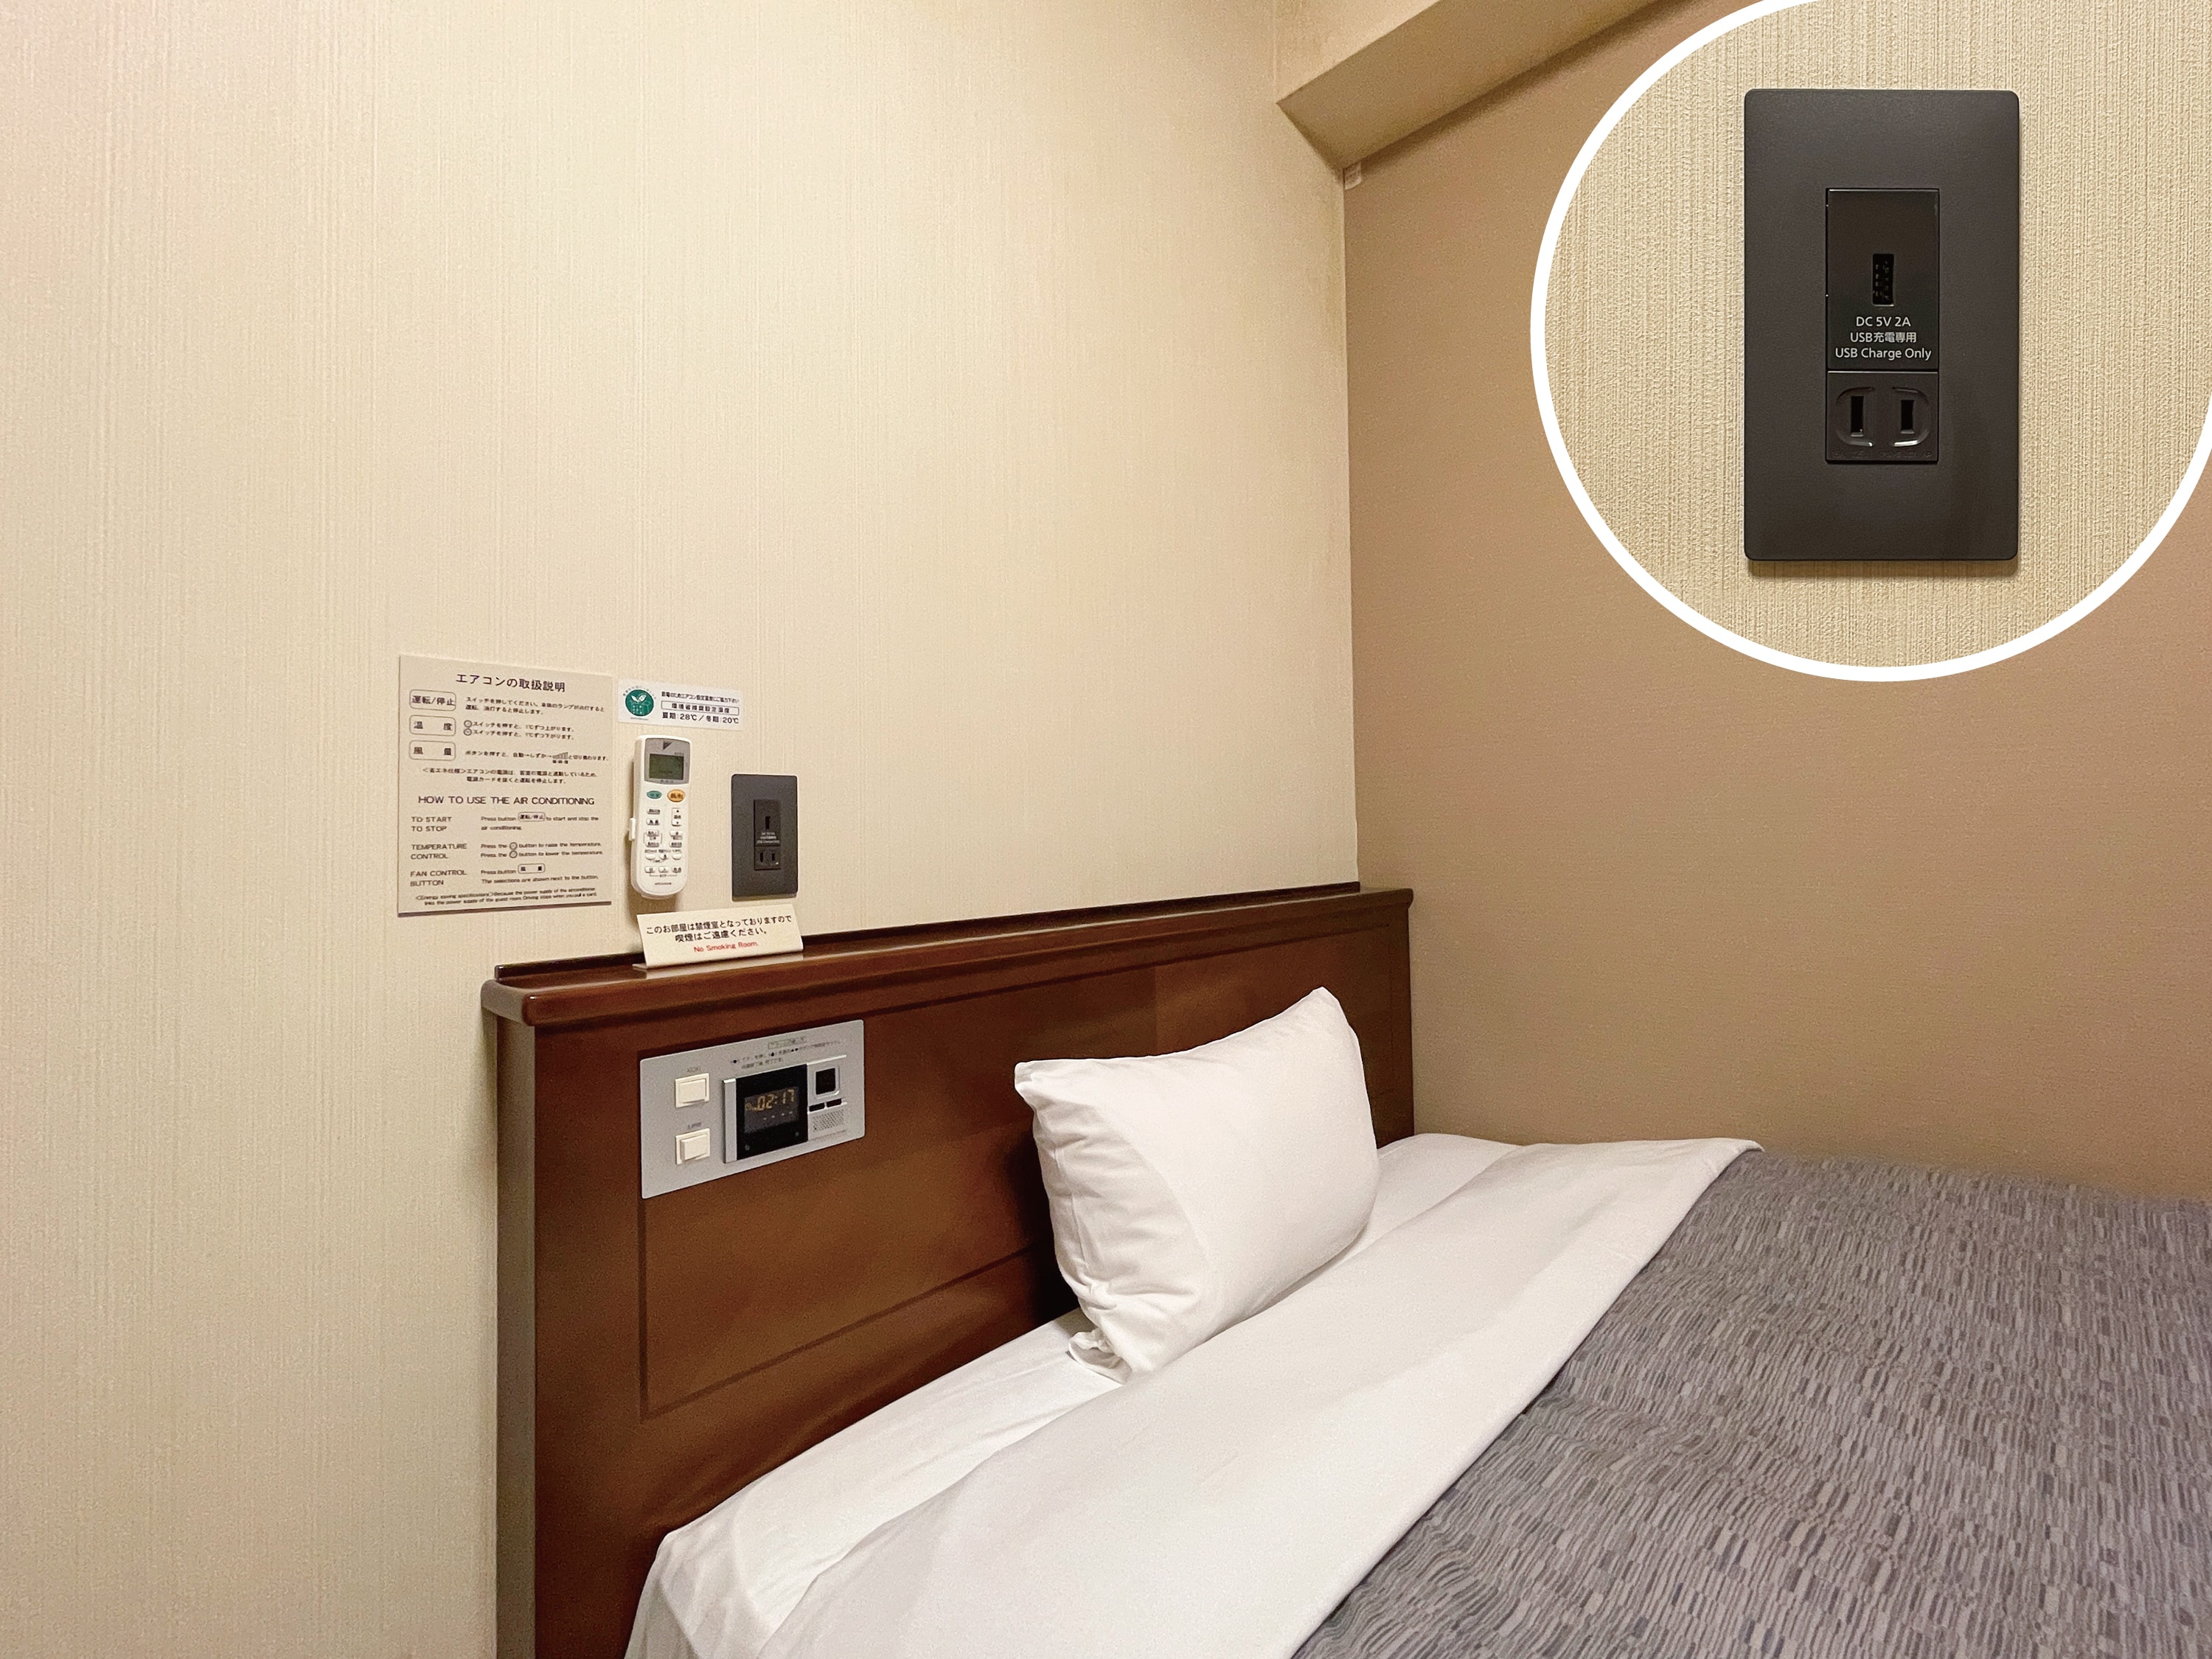 ◆ We have installed a USB outlet near the bedside of the guest room ◆